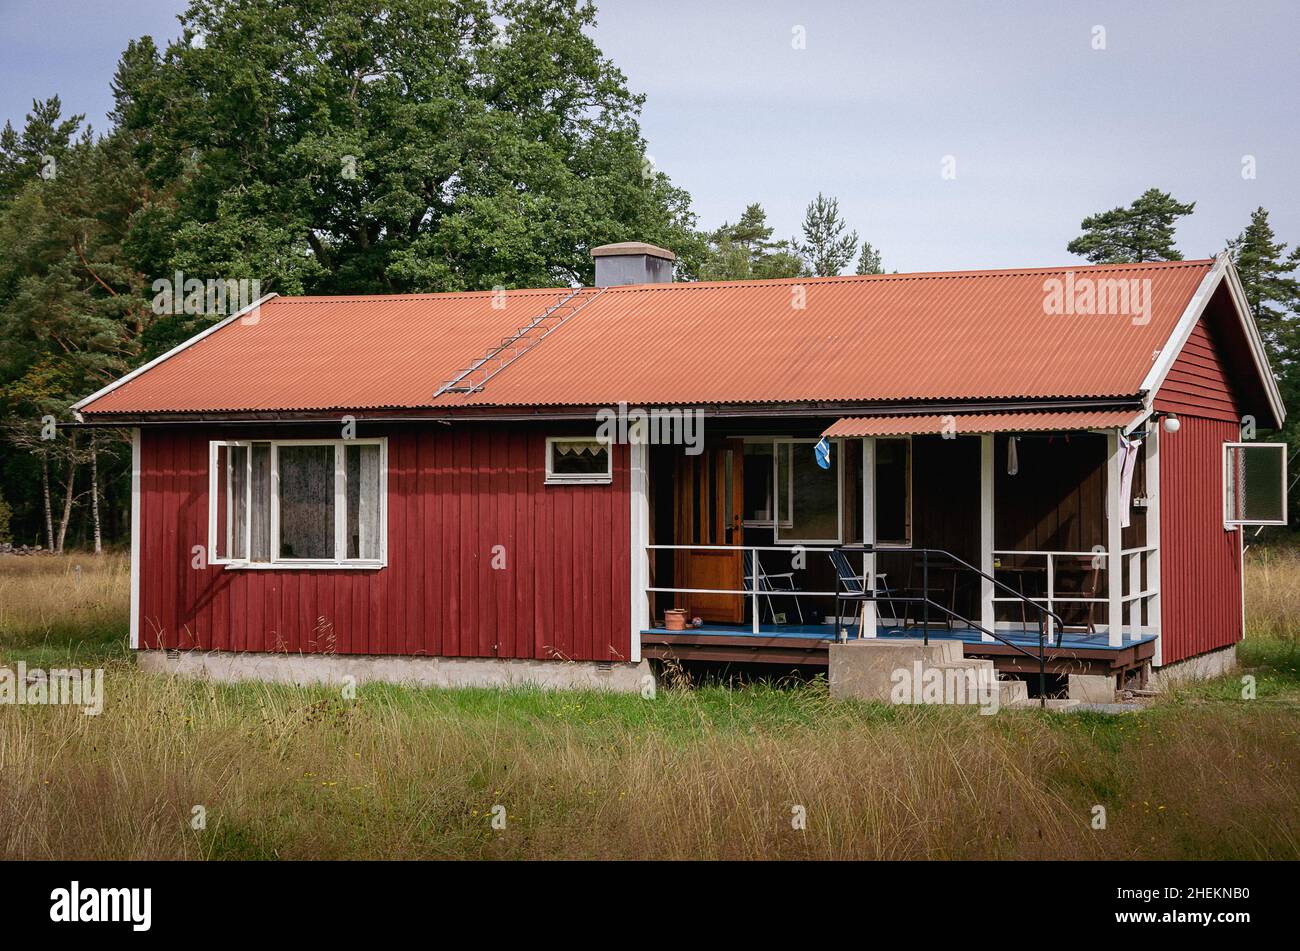 Symbolic image: Small wooden house in the style of a typical Swedish wooden hut. Stock Photo